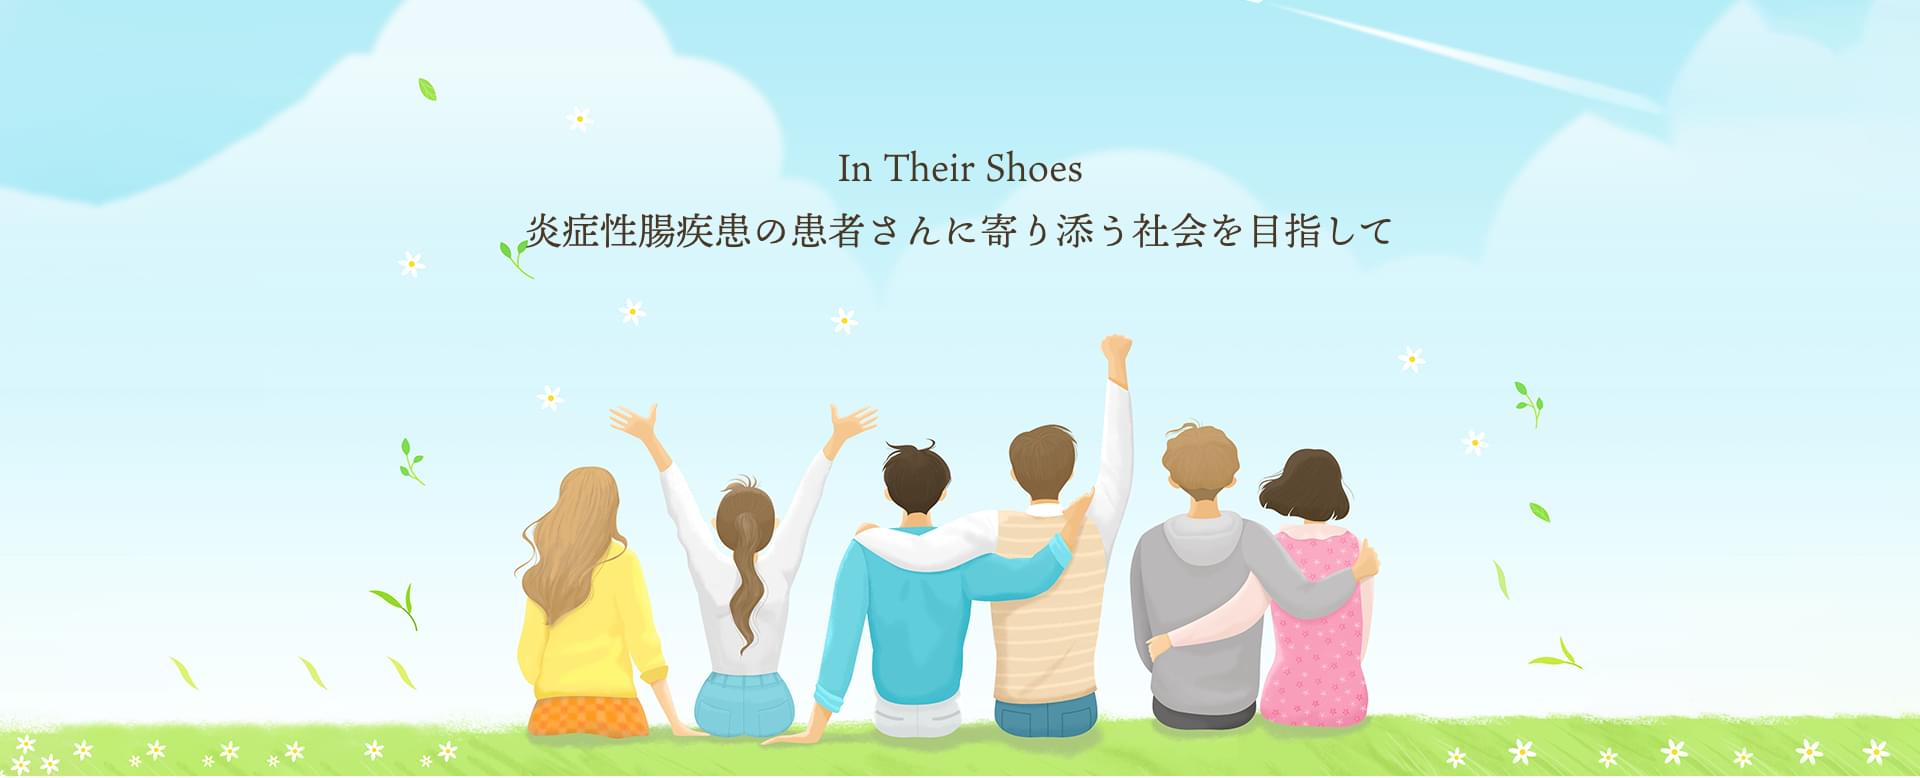 In their Shoes 炎症性腸疾患の患者さんに寄り添う社会を目指して